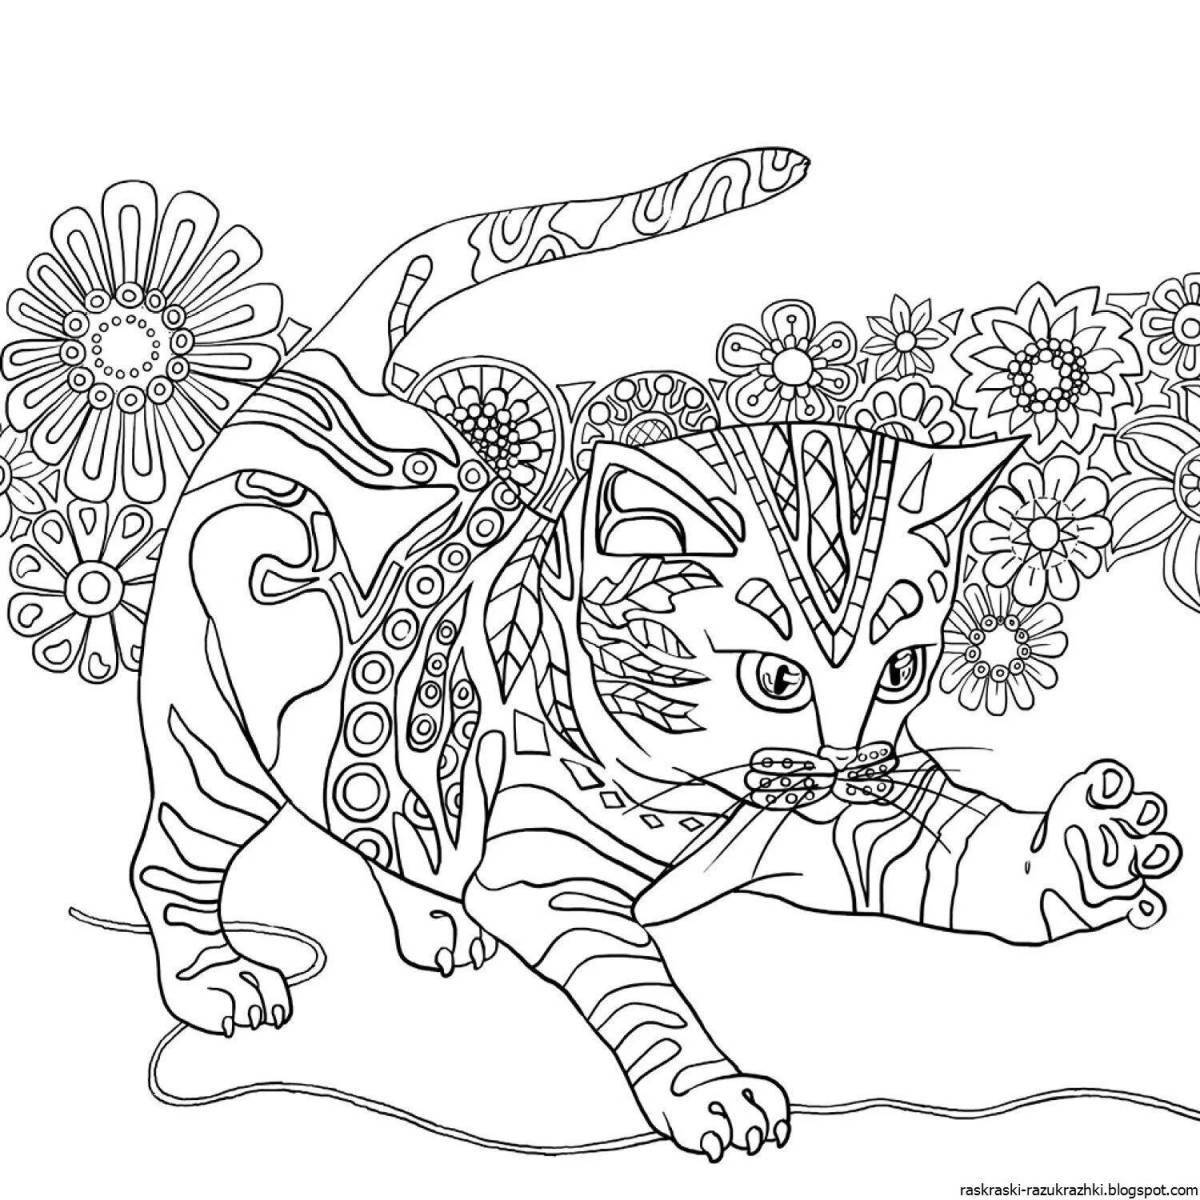 Adorable coloring book for 11 year old animals